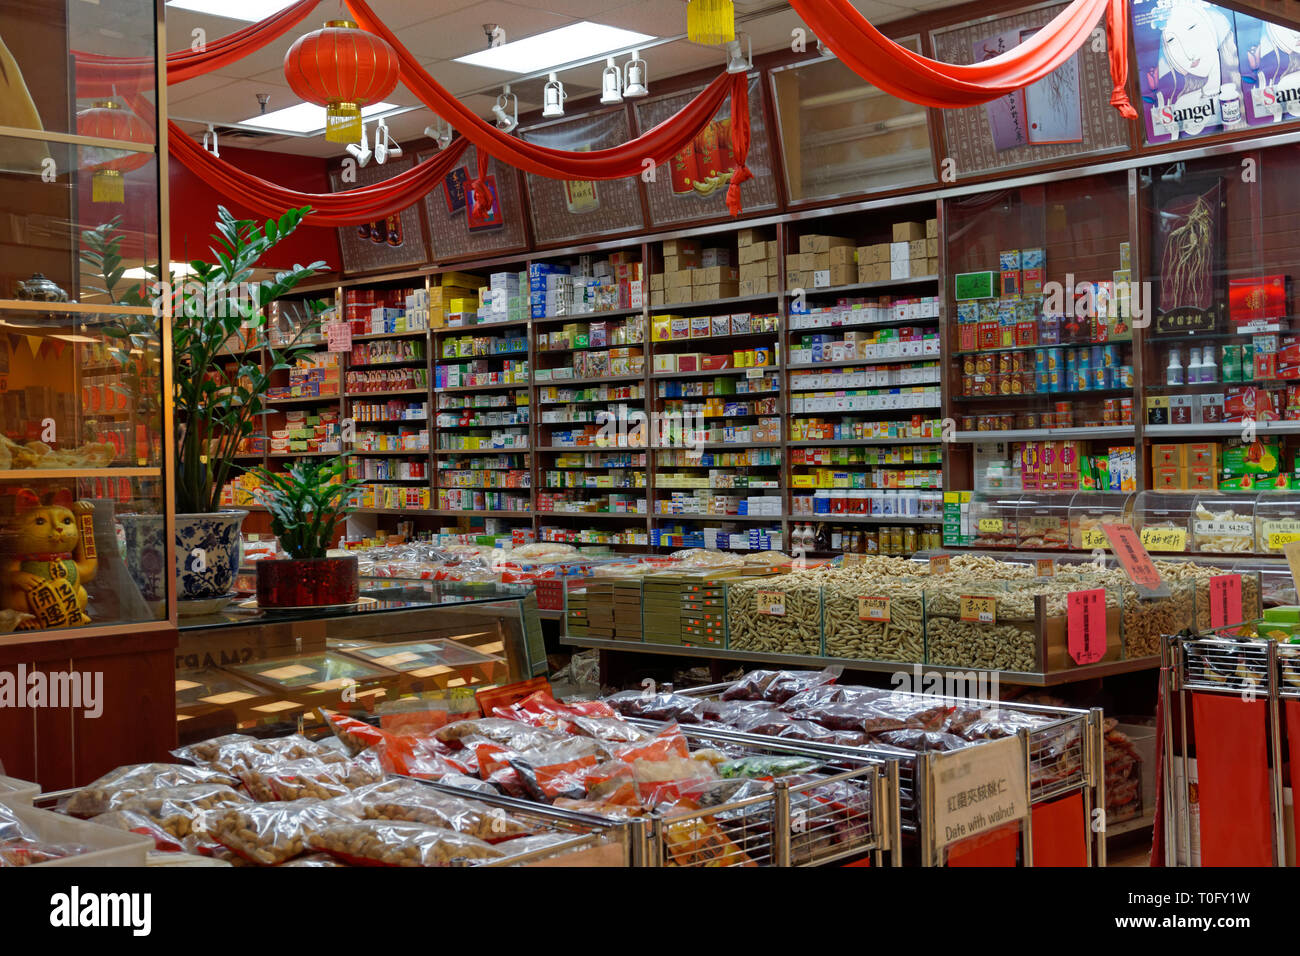 interior of a traditional chinese medicine shop in richmond vancouver british columbia canada T0FY1W